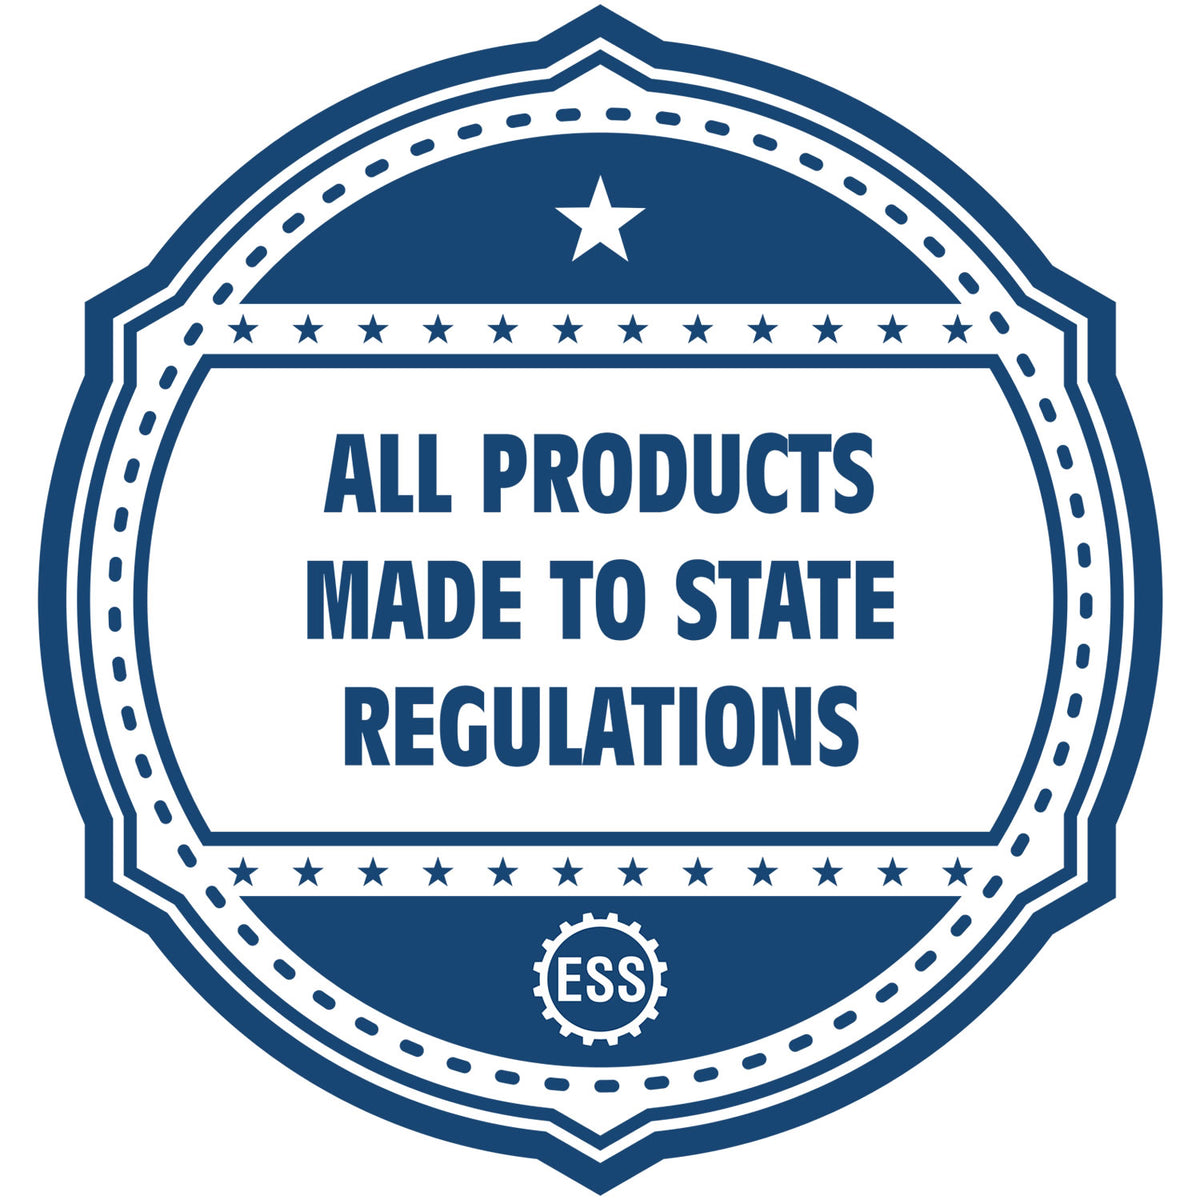 An icon or badge element for the Handheld Colorado Architect Seal Embosser showing that this product is made in compliance with state regulations.